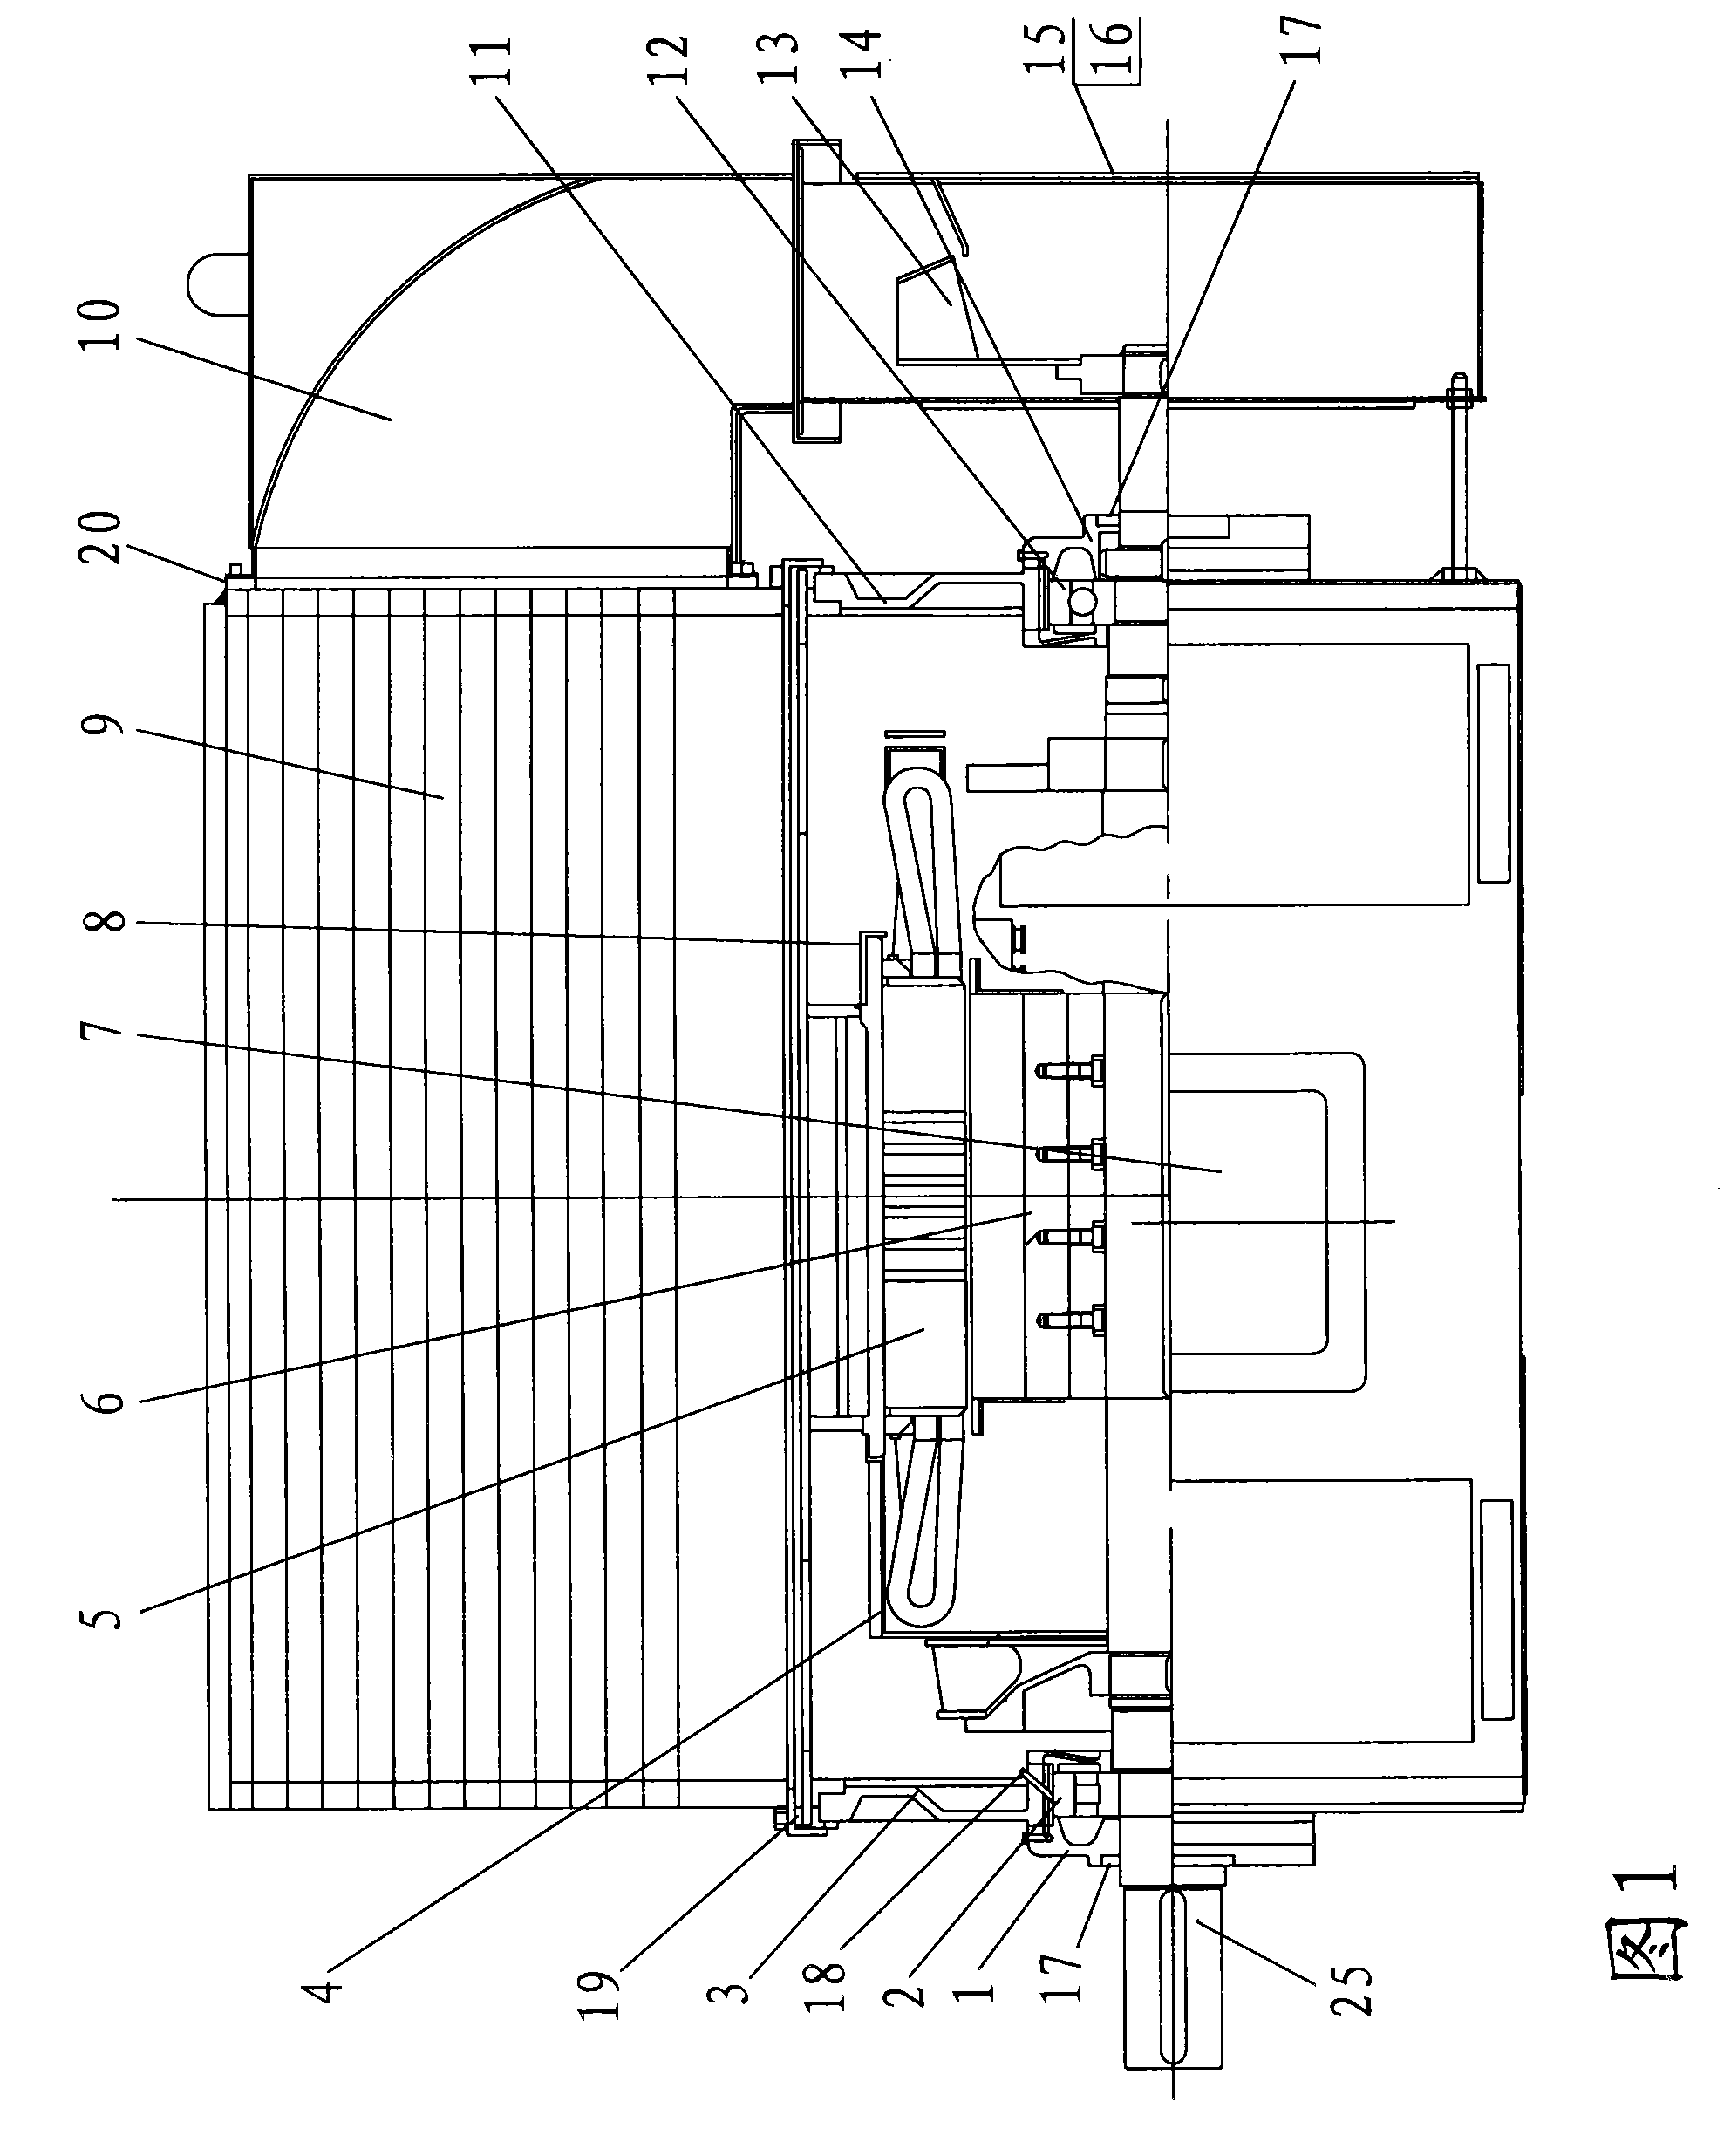 Permanent magnetic synchronous motor